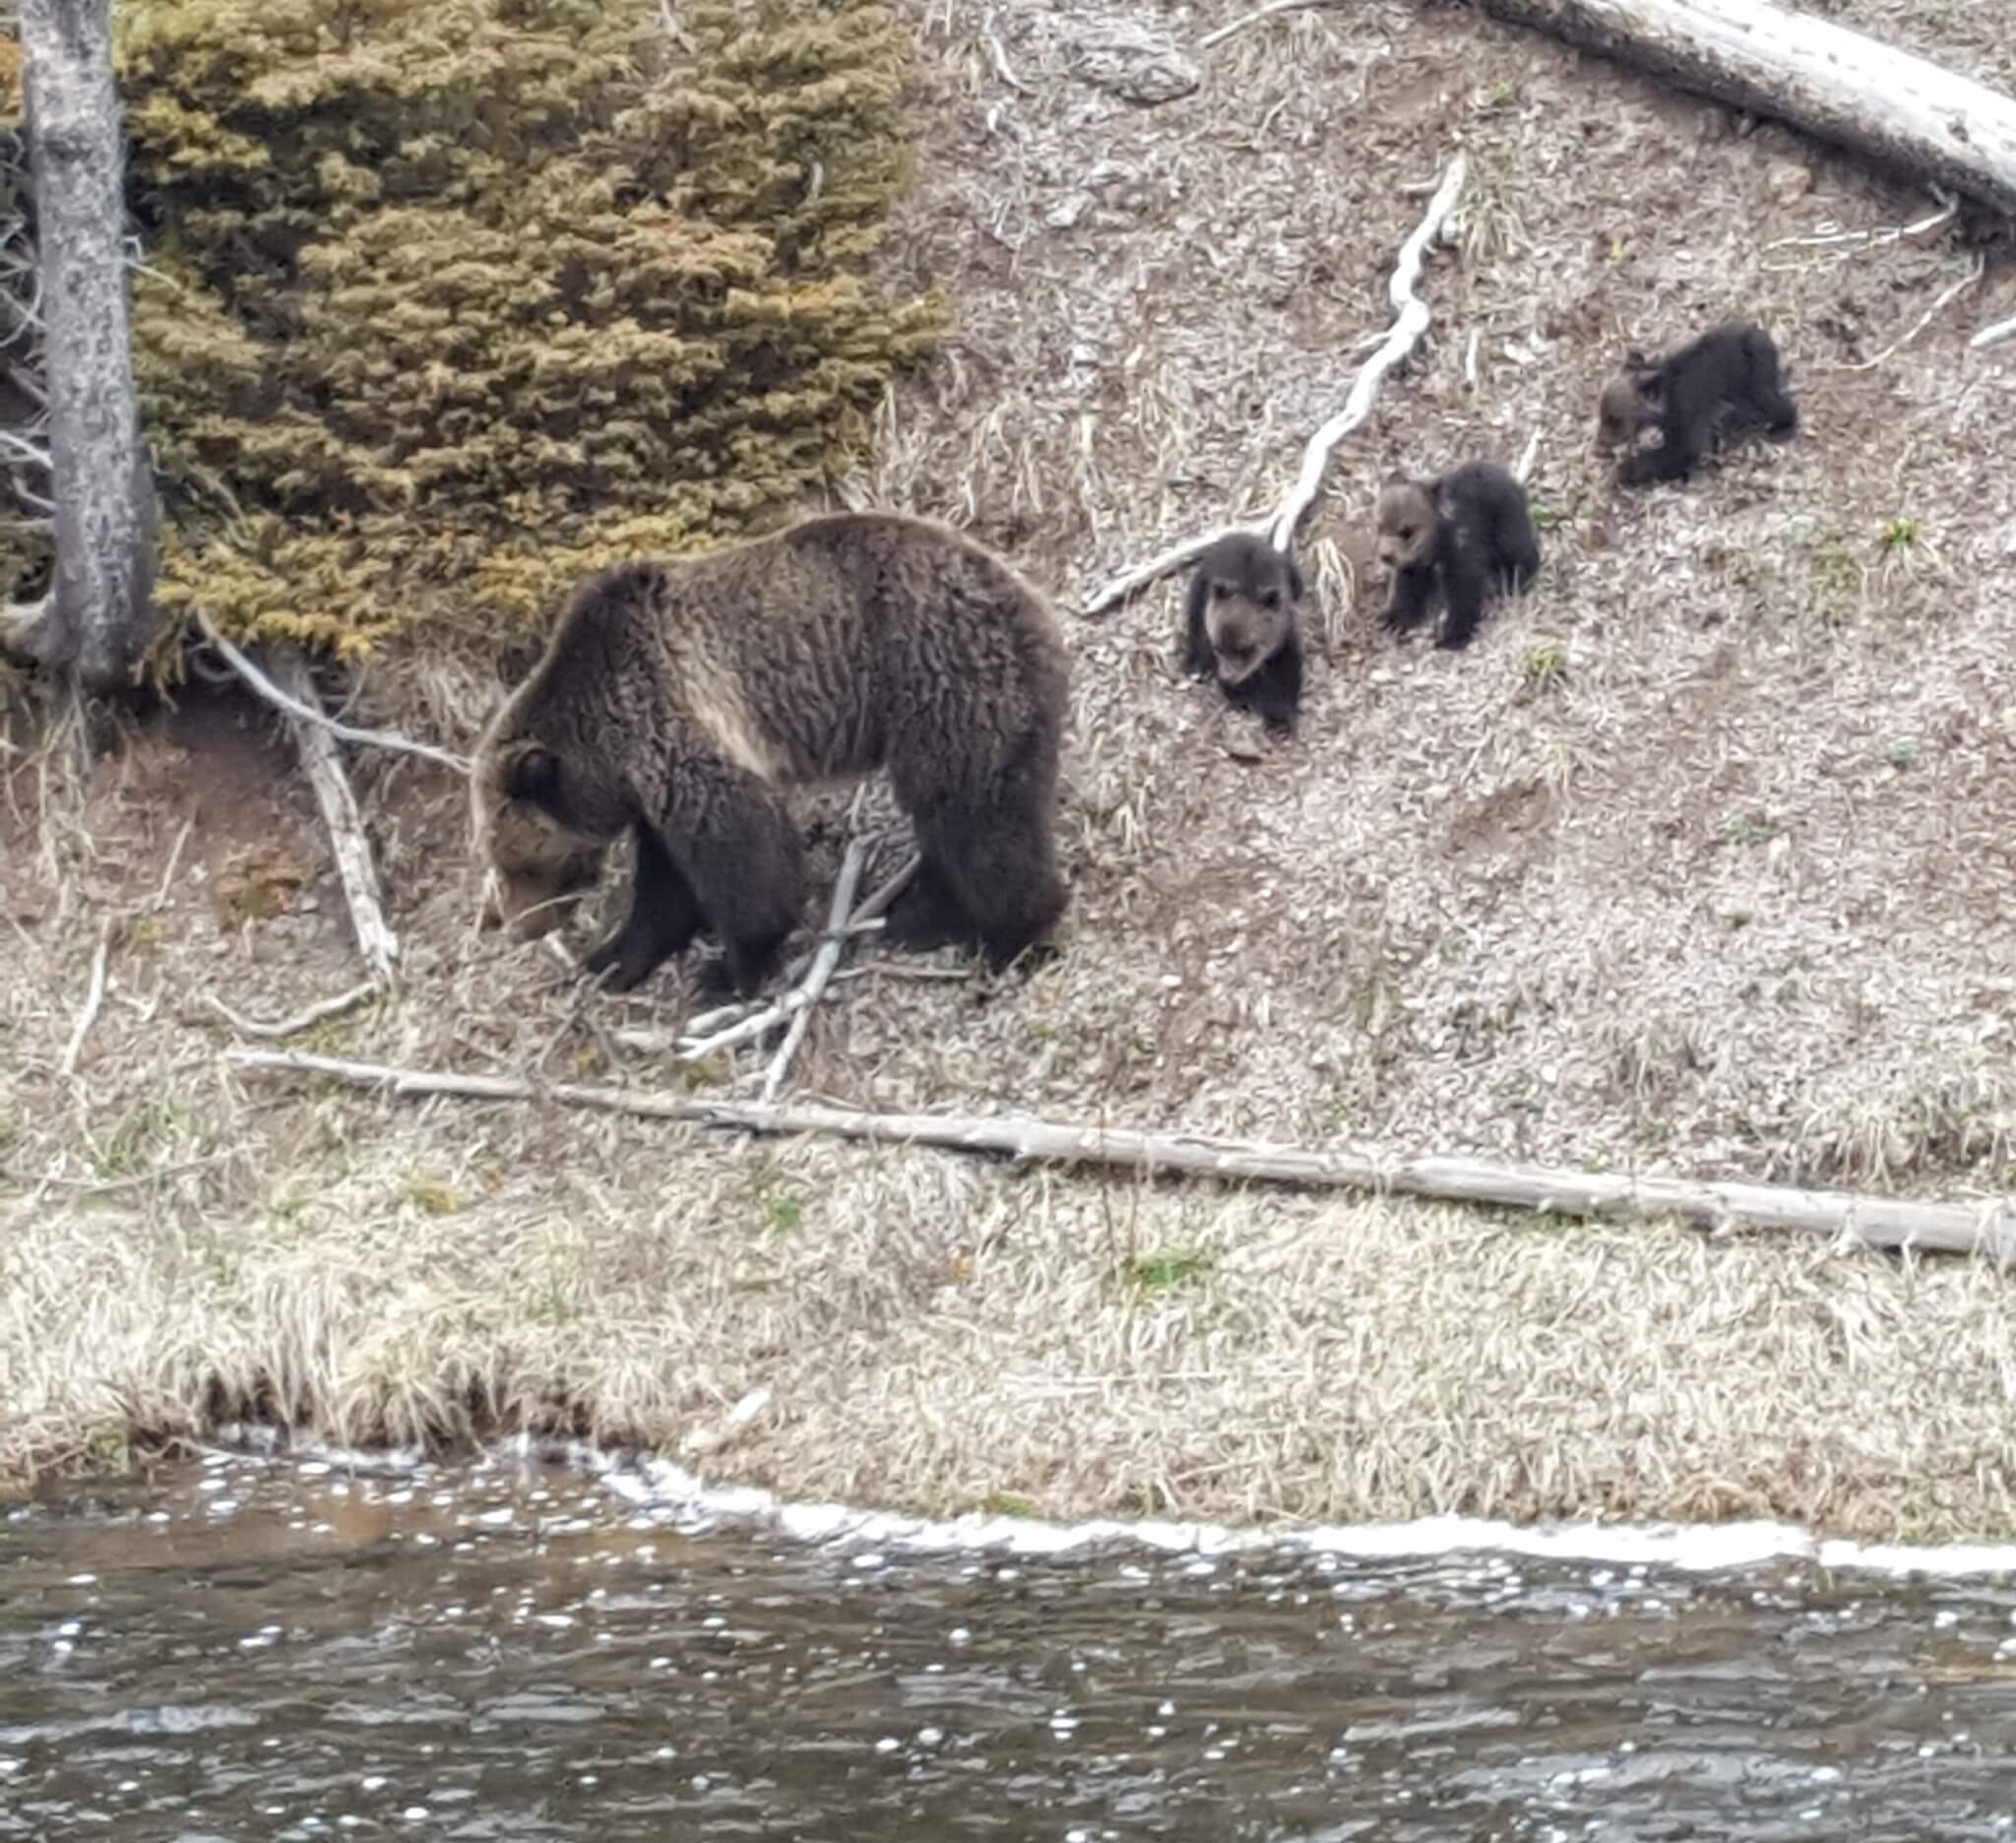 Grizzlies at Yellowstone National Park